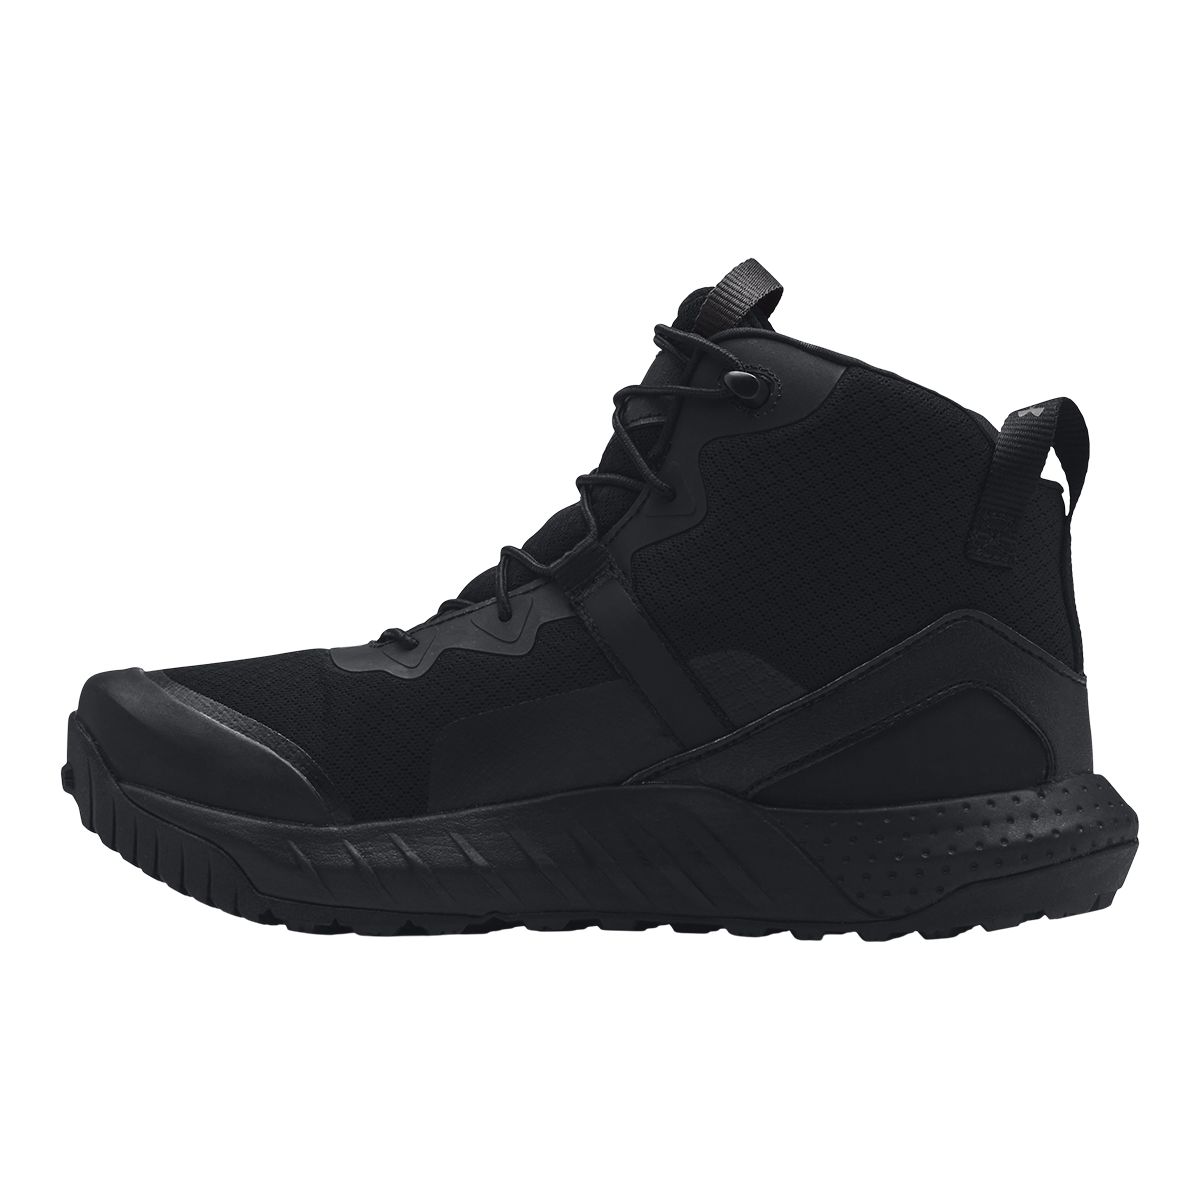 Under Armour Charged Valsetz Mid Men's Tactical Boot